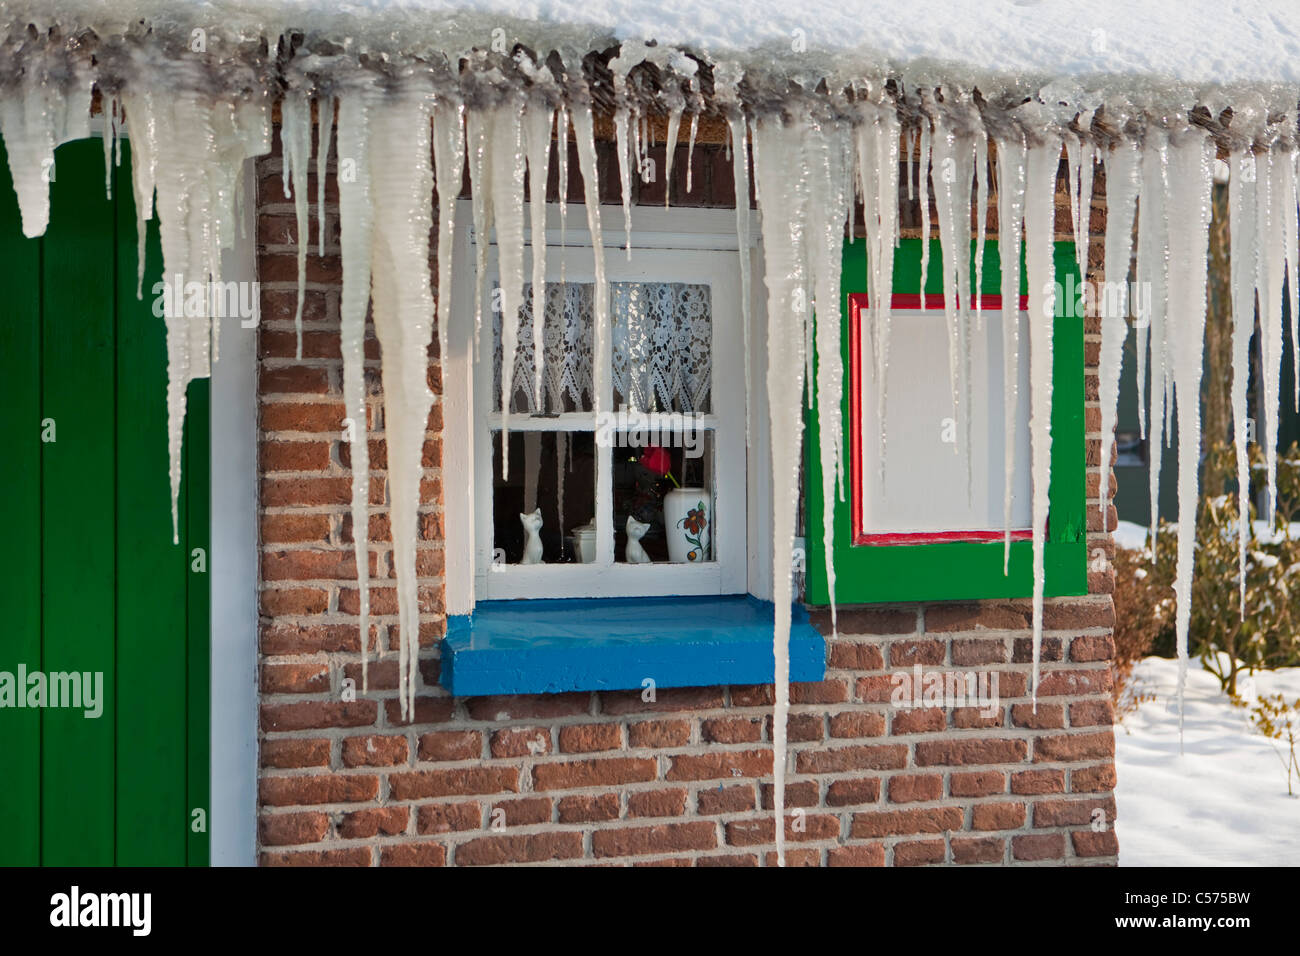 The Netherlands, Staphorst, Winter, Icicles on farm roof. Stock Photo